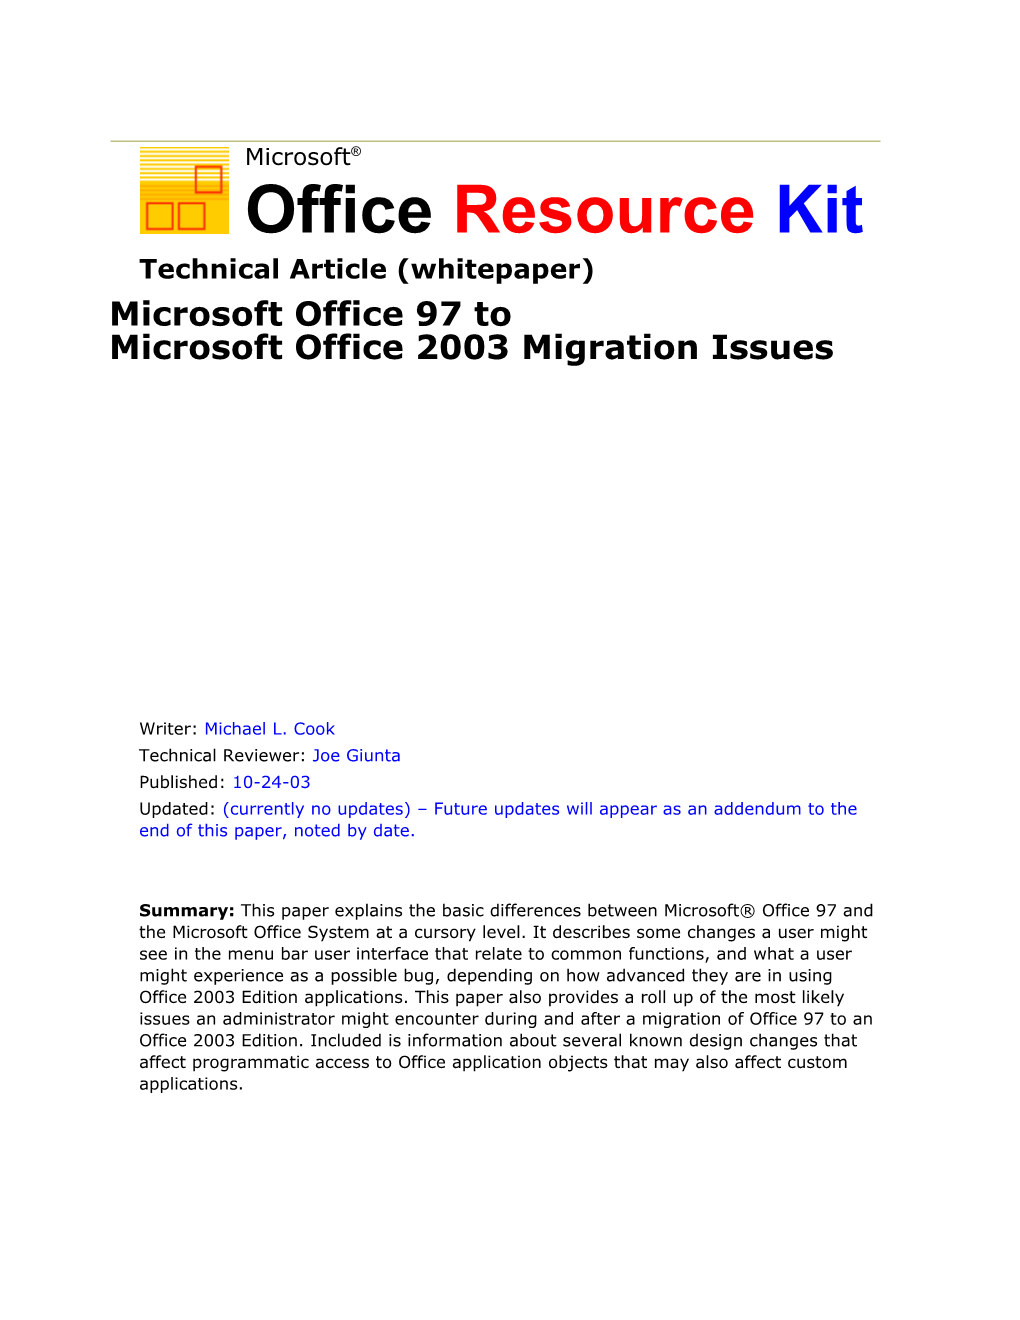 Microsoft Office 97 Tomicrosoft Office 2003 Migration Issues